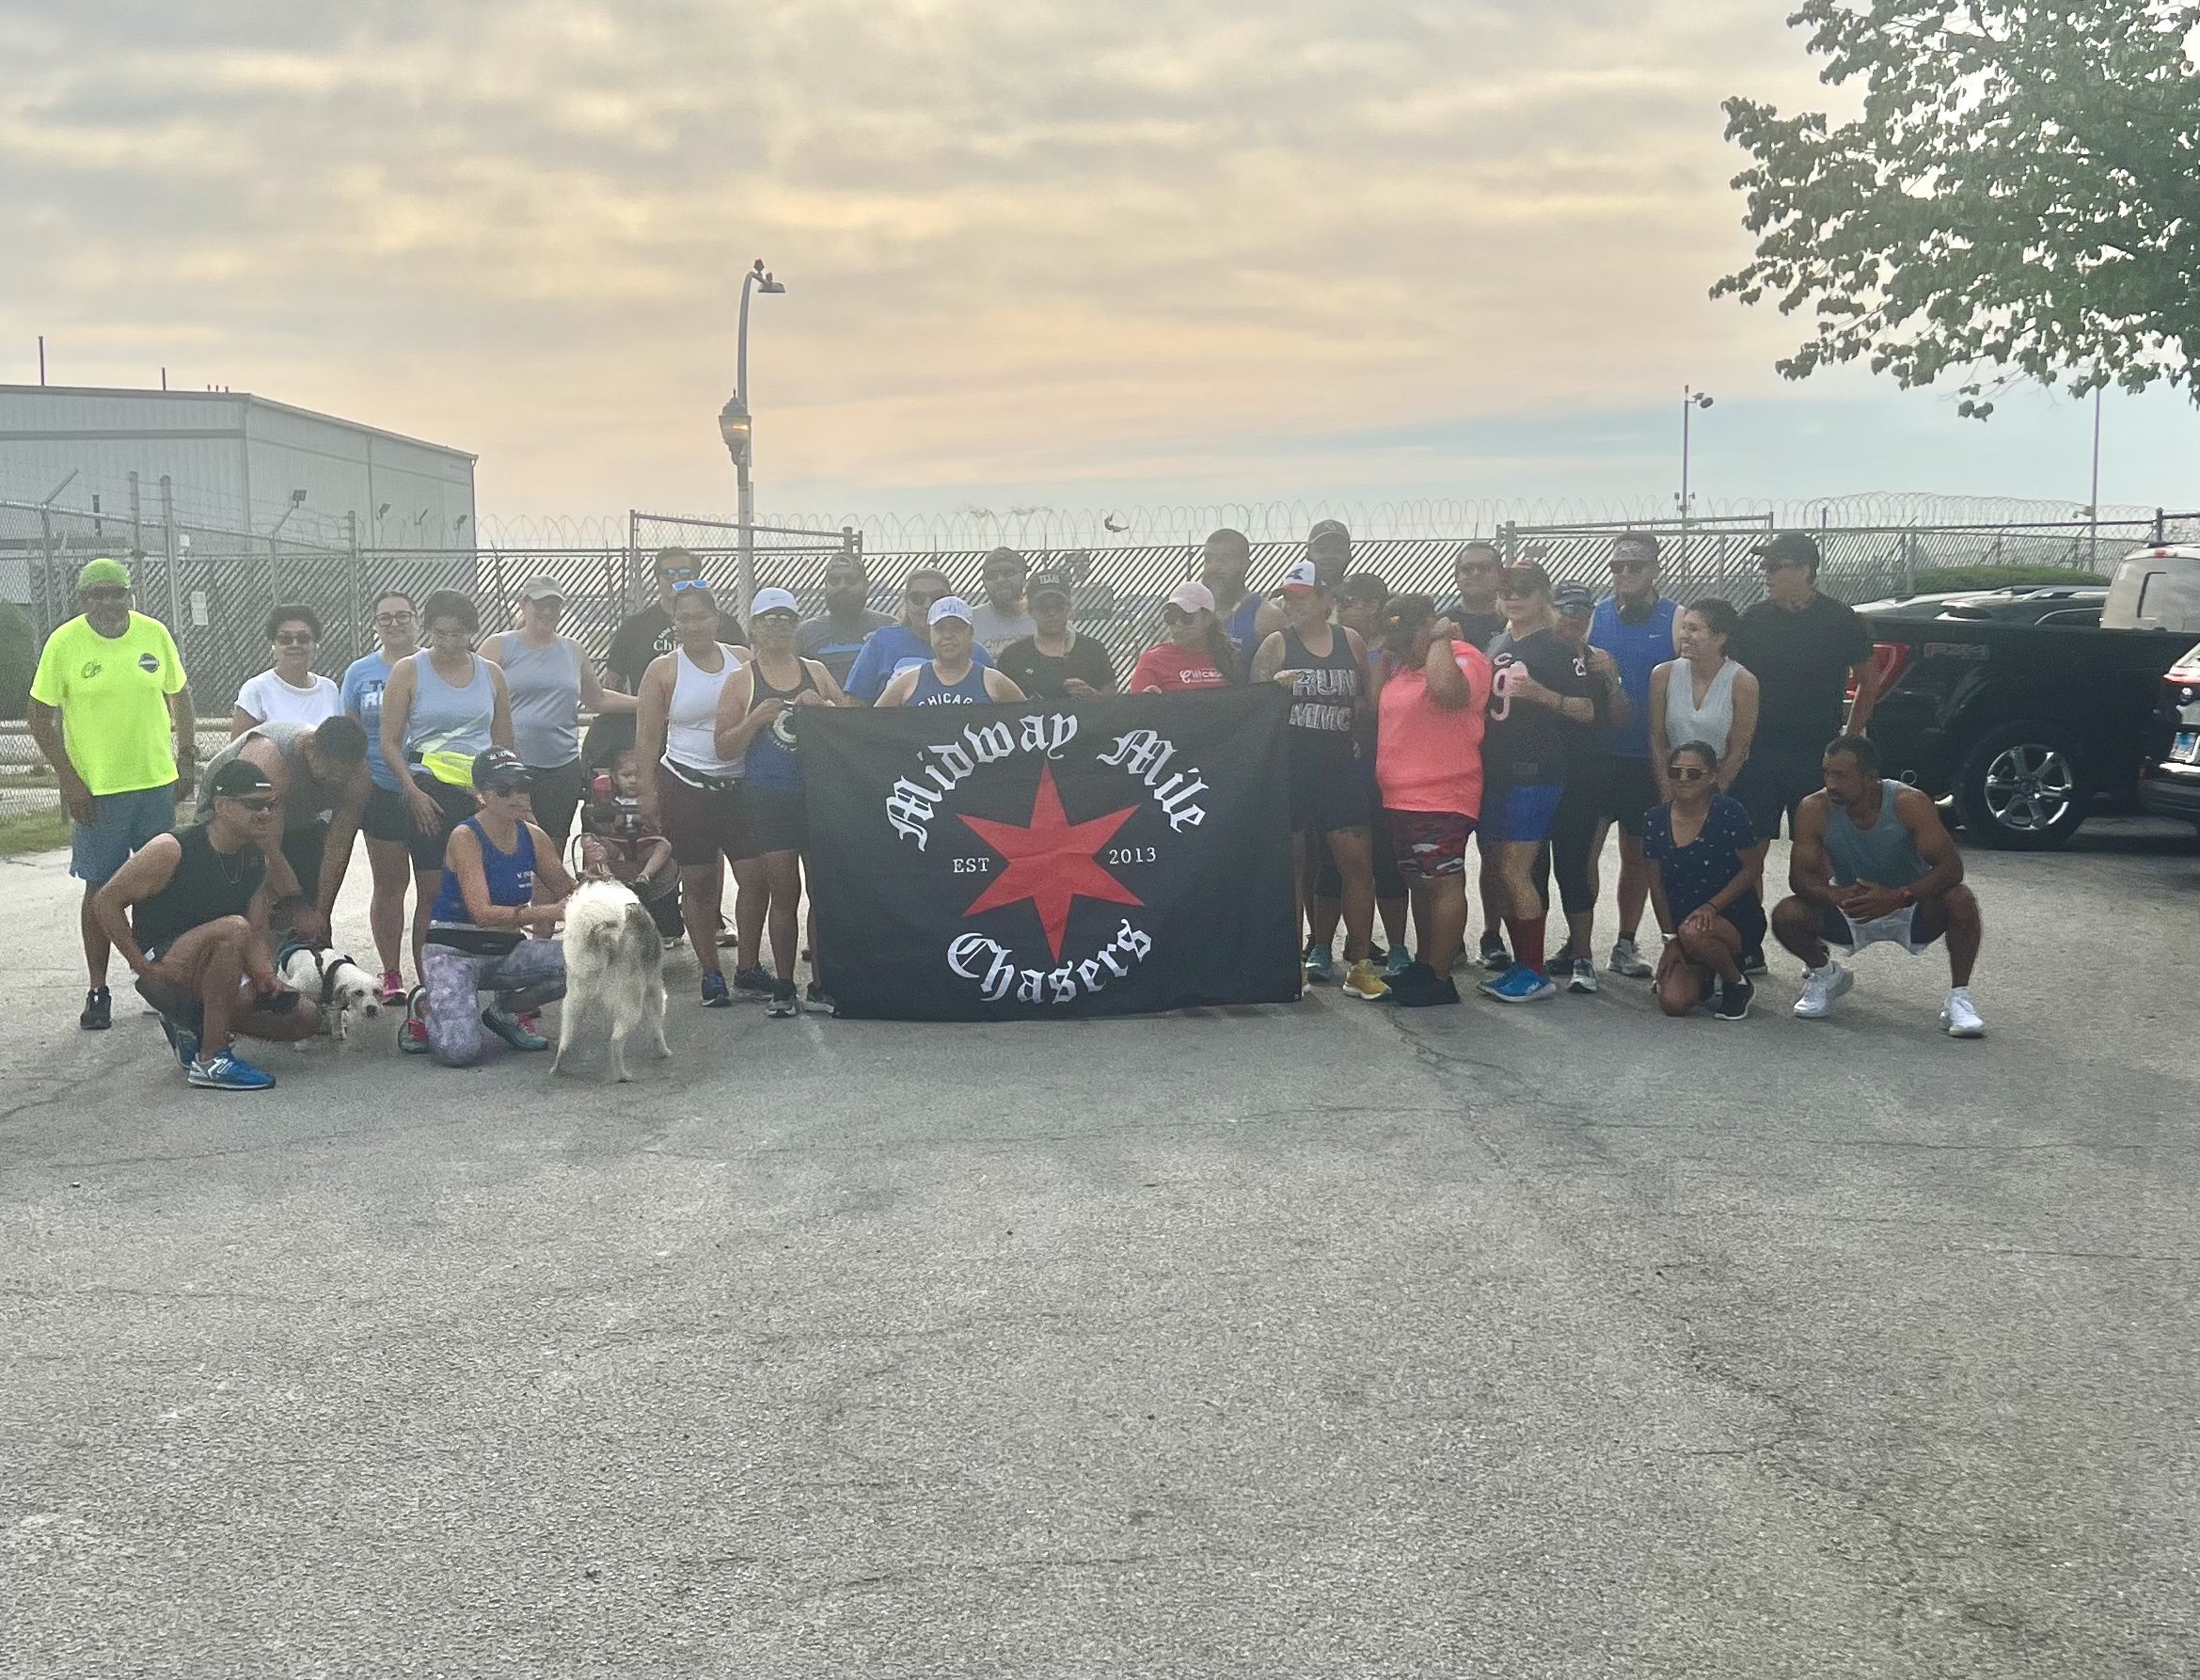 A group photo of the Midway Mile Chasers in front of the Midway International Airport. There are about 30 people posing together, holding a black flag in the middle. The flag has a big red Chicago star in the middle and has white text around it that says "Midway Mile Chasers, established 2013".